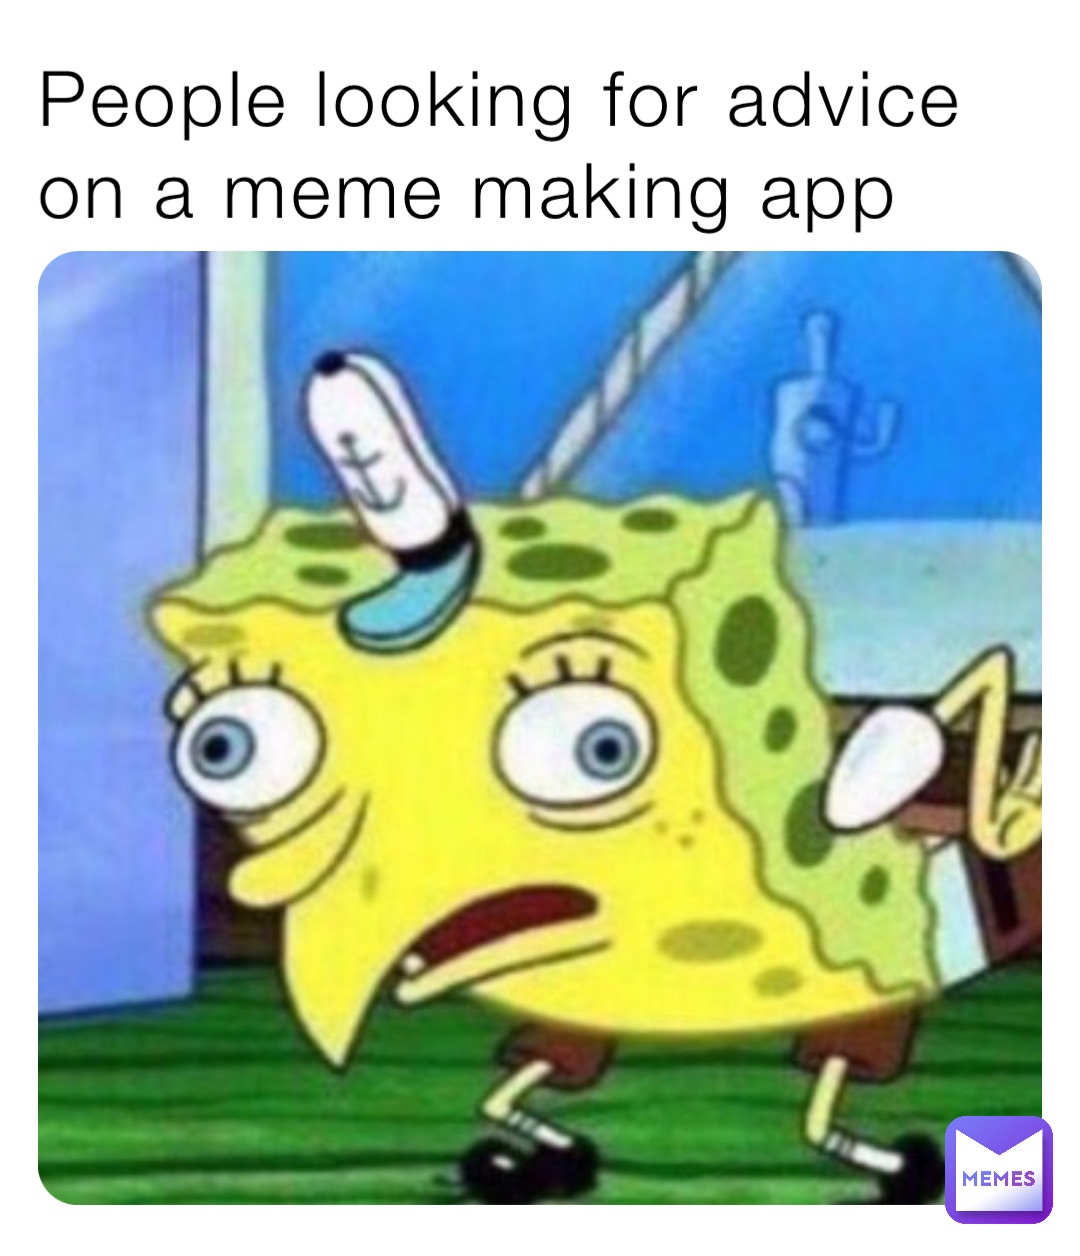 People looking for advice on a meme making app